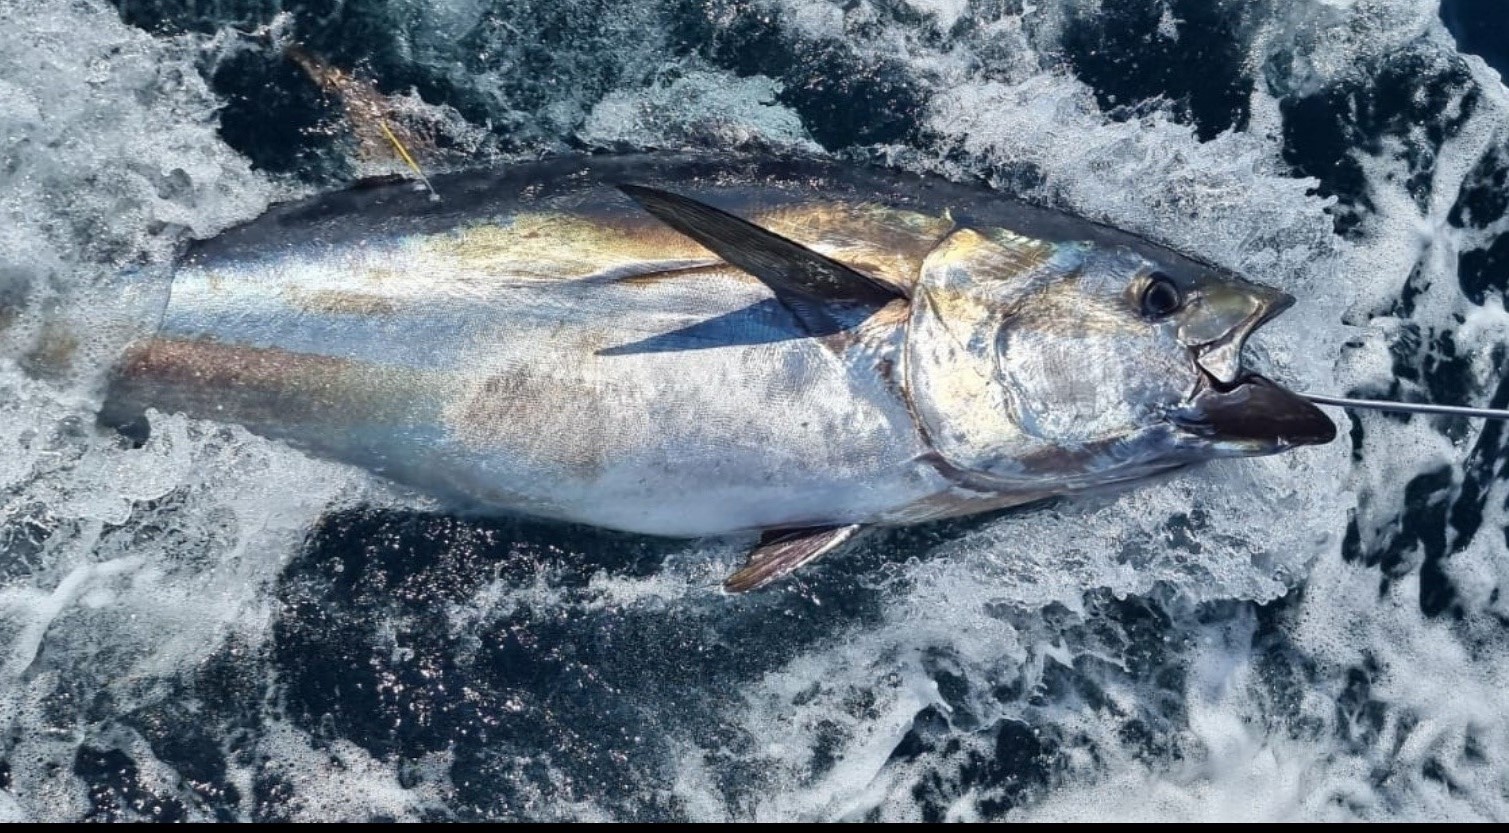 Bluefin tuna caught and tagged in NI research first